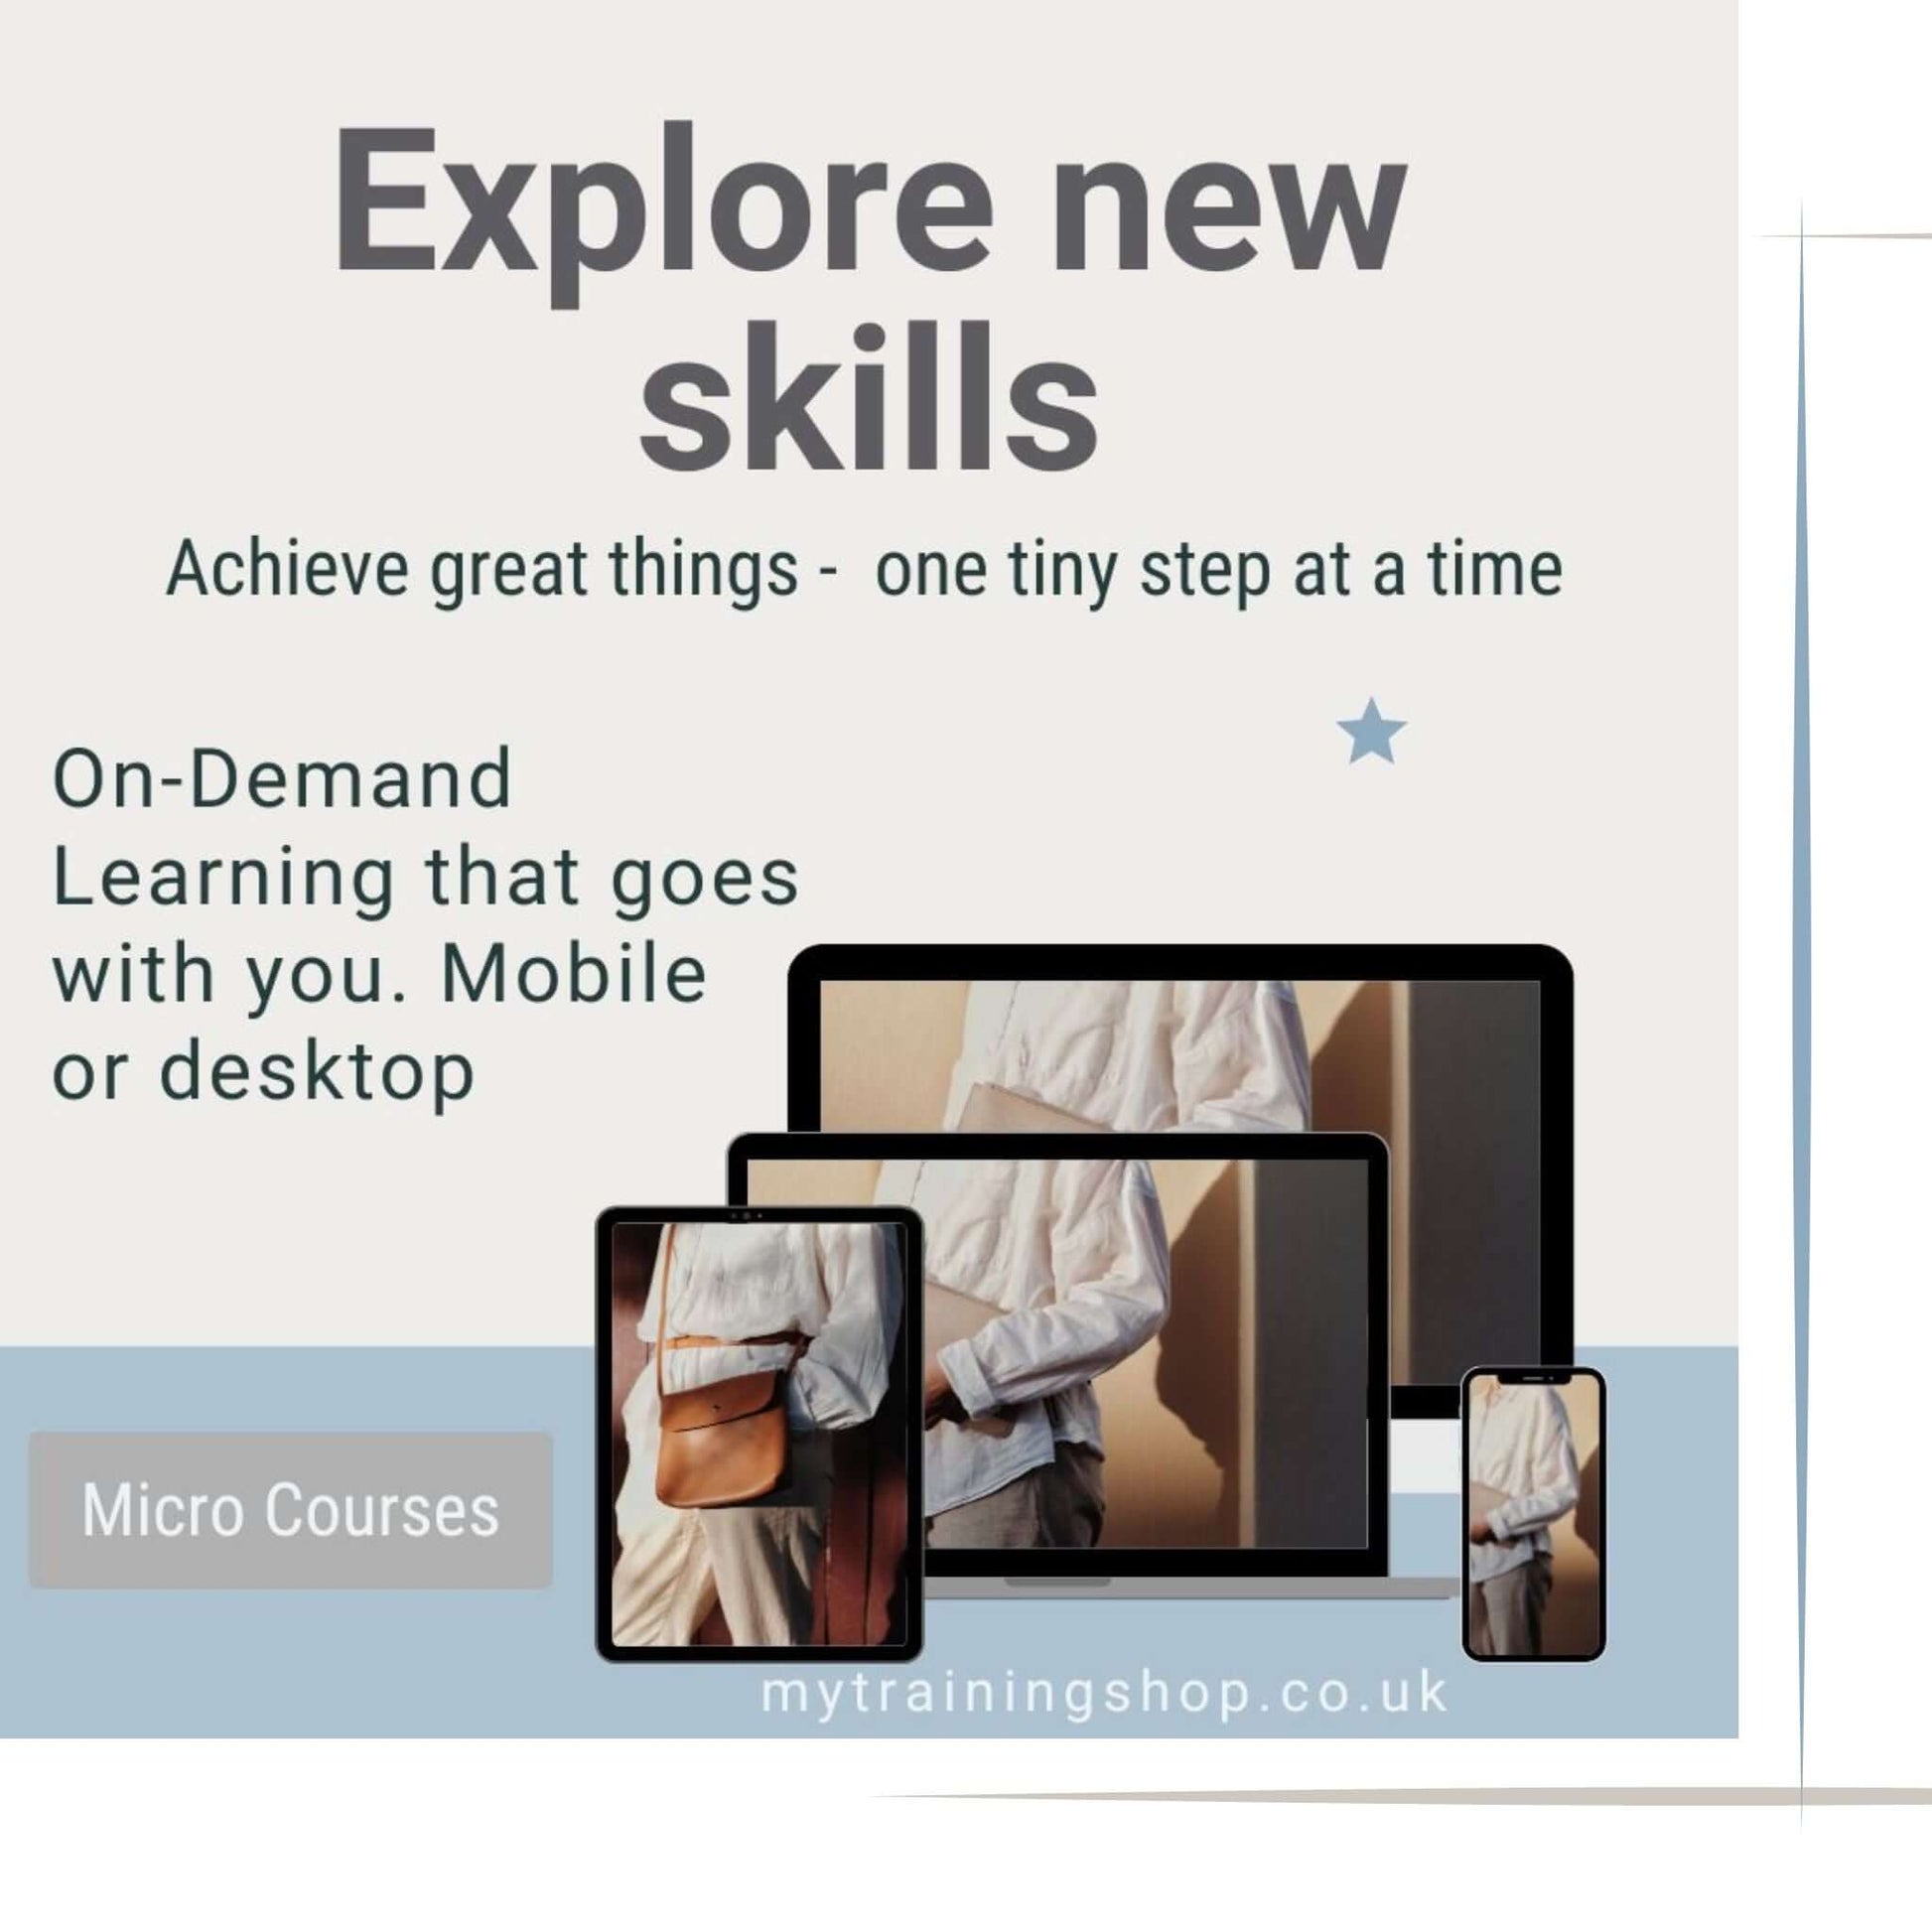 Mini courses are easily consumed and retained. designed for busy learners 